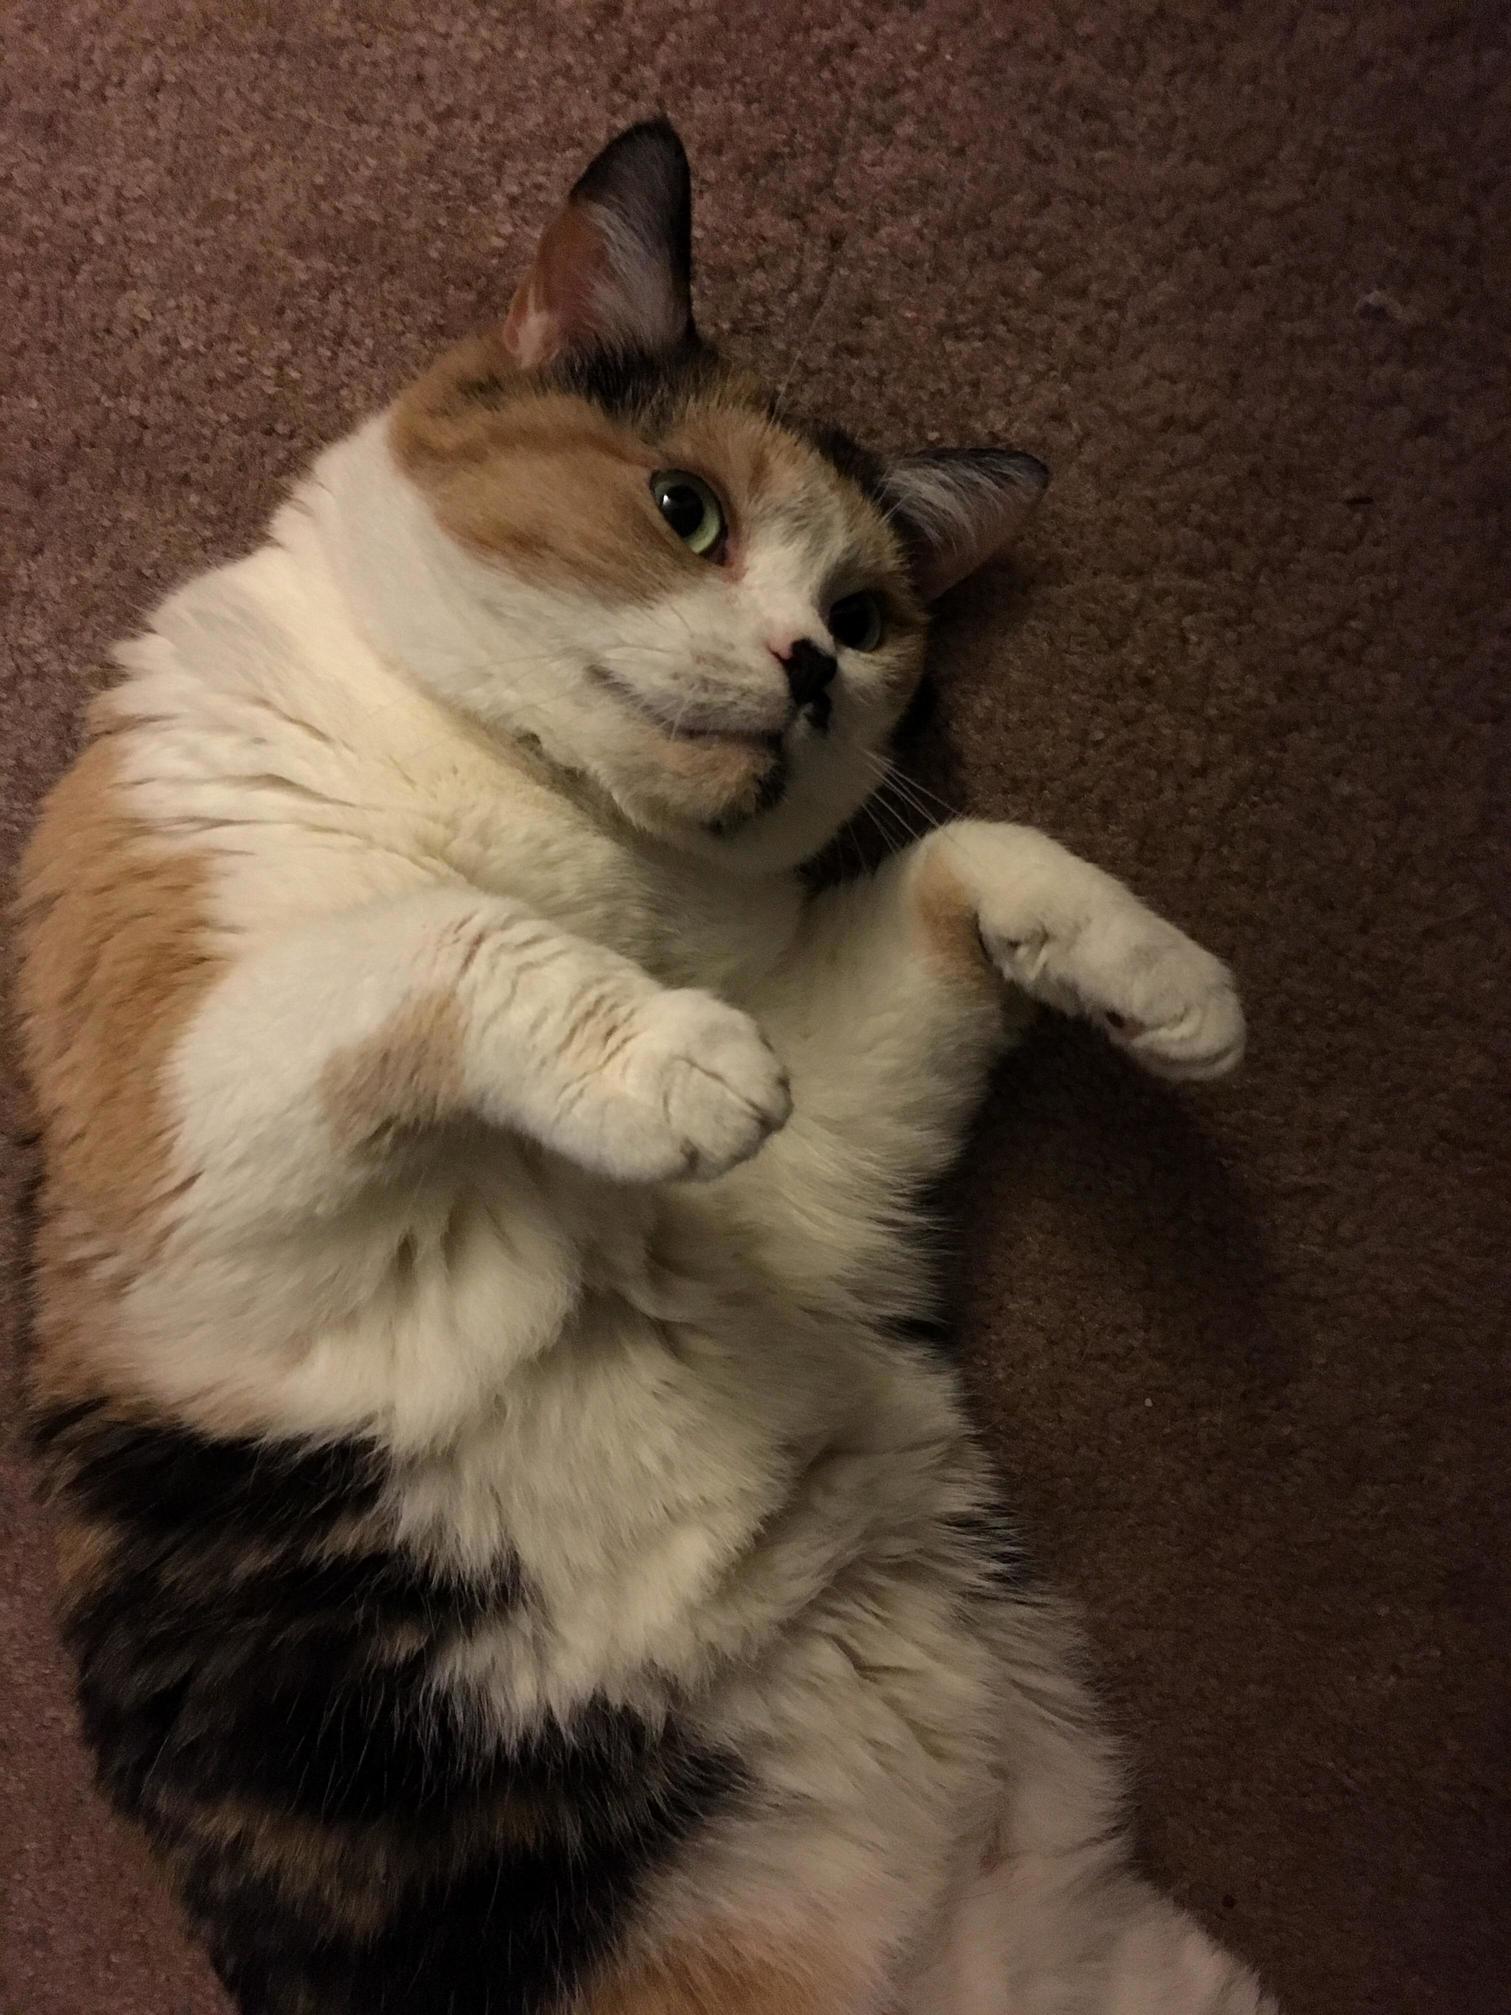 It might be tempting but do not touch the belly